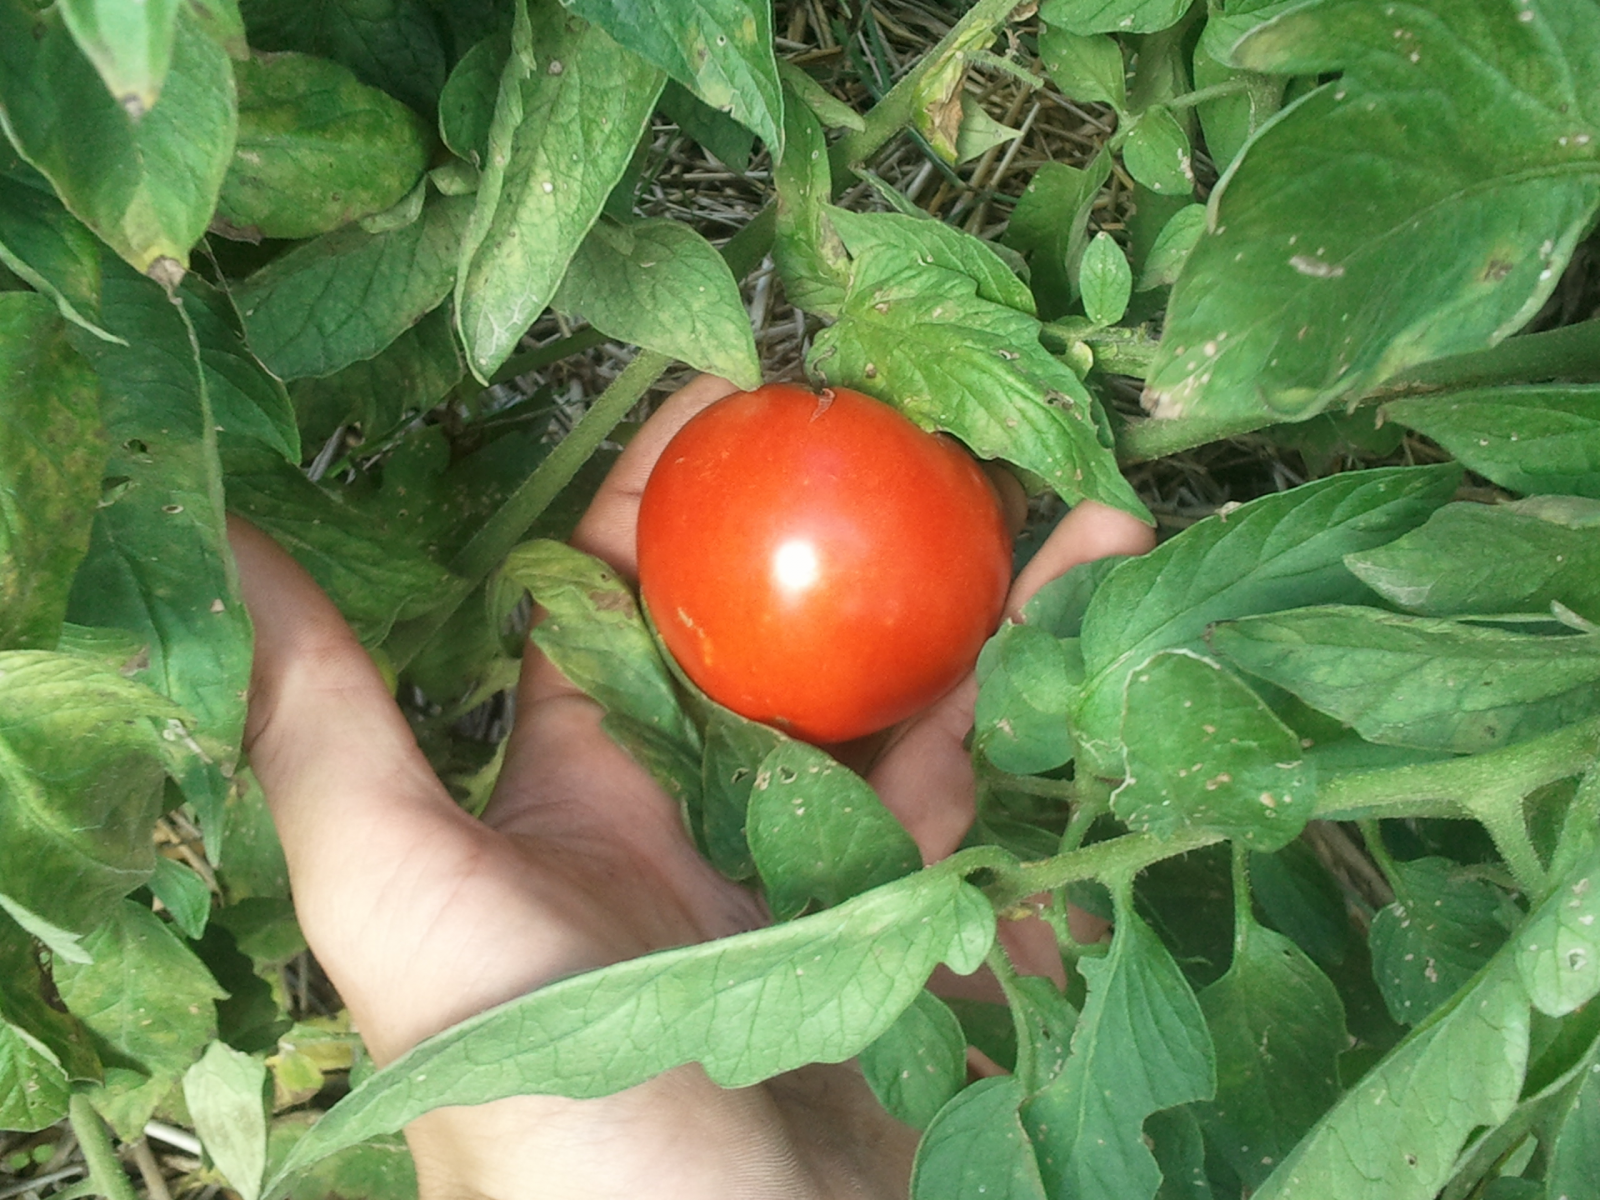 (2/2) Pest free. The besting tasting tomatoes he has ever had, he said.